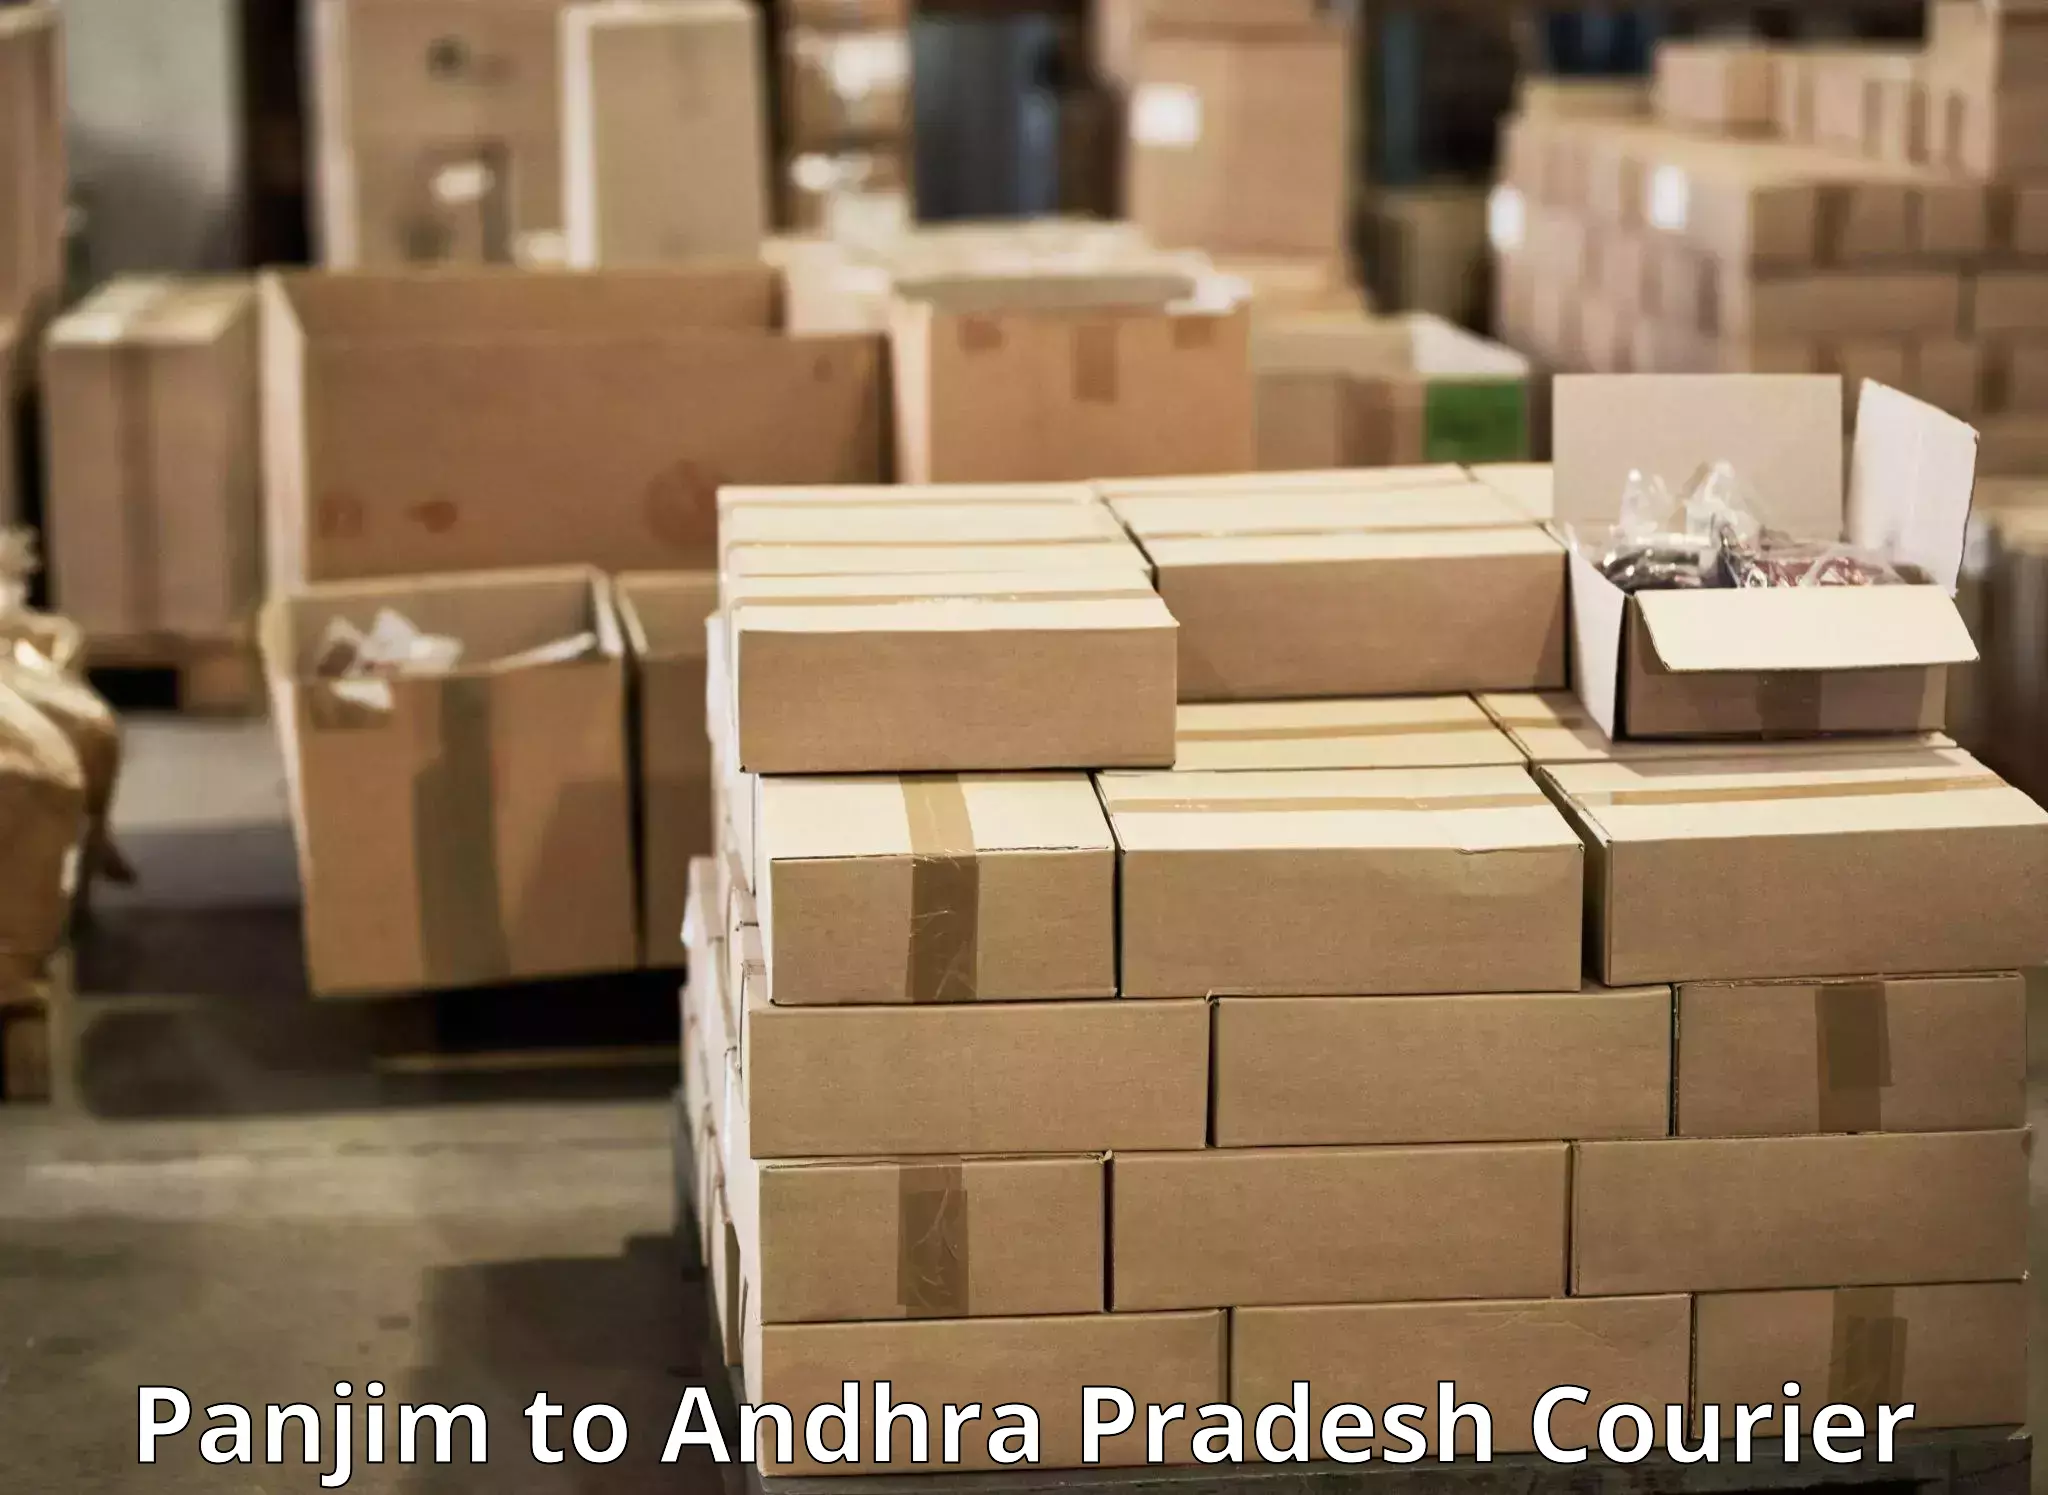 Express delivery capabilities in Panjim to Rajahmundry